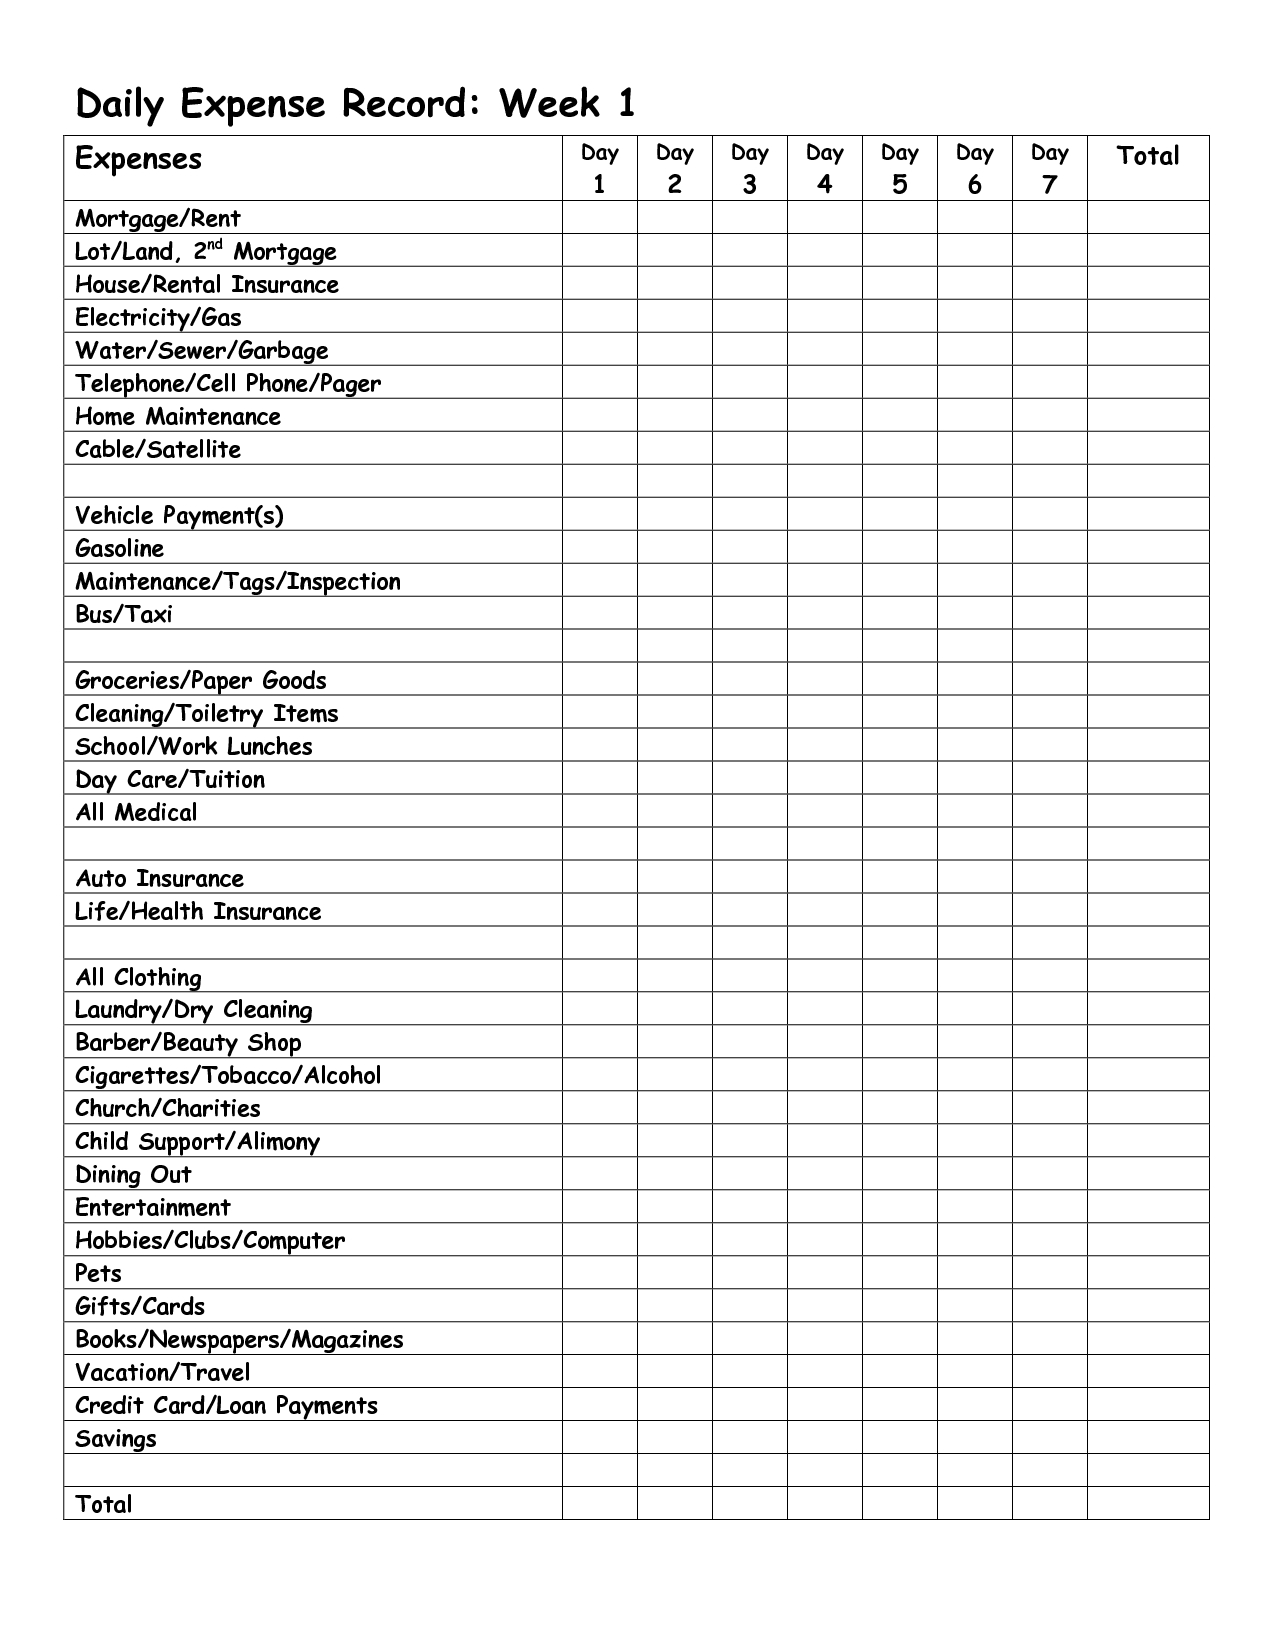 Monthly Expense Report Template  Daily Expense Record Week intended for Shop Report Template